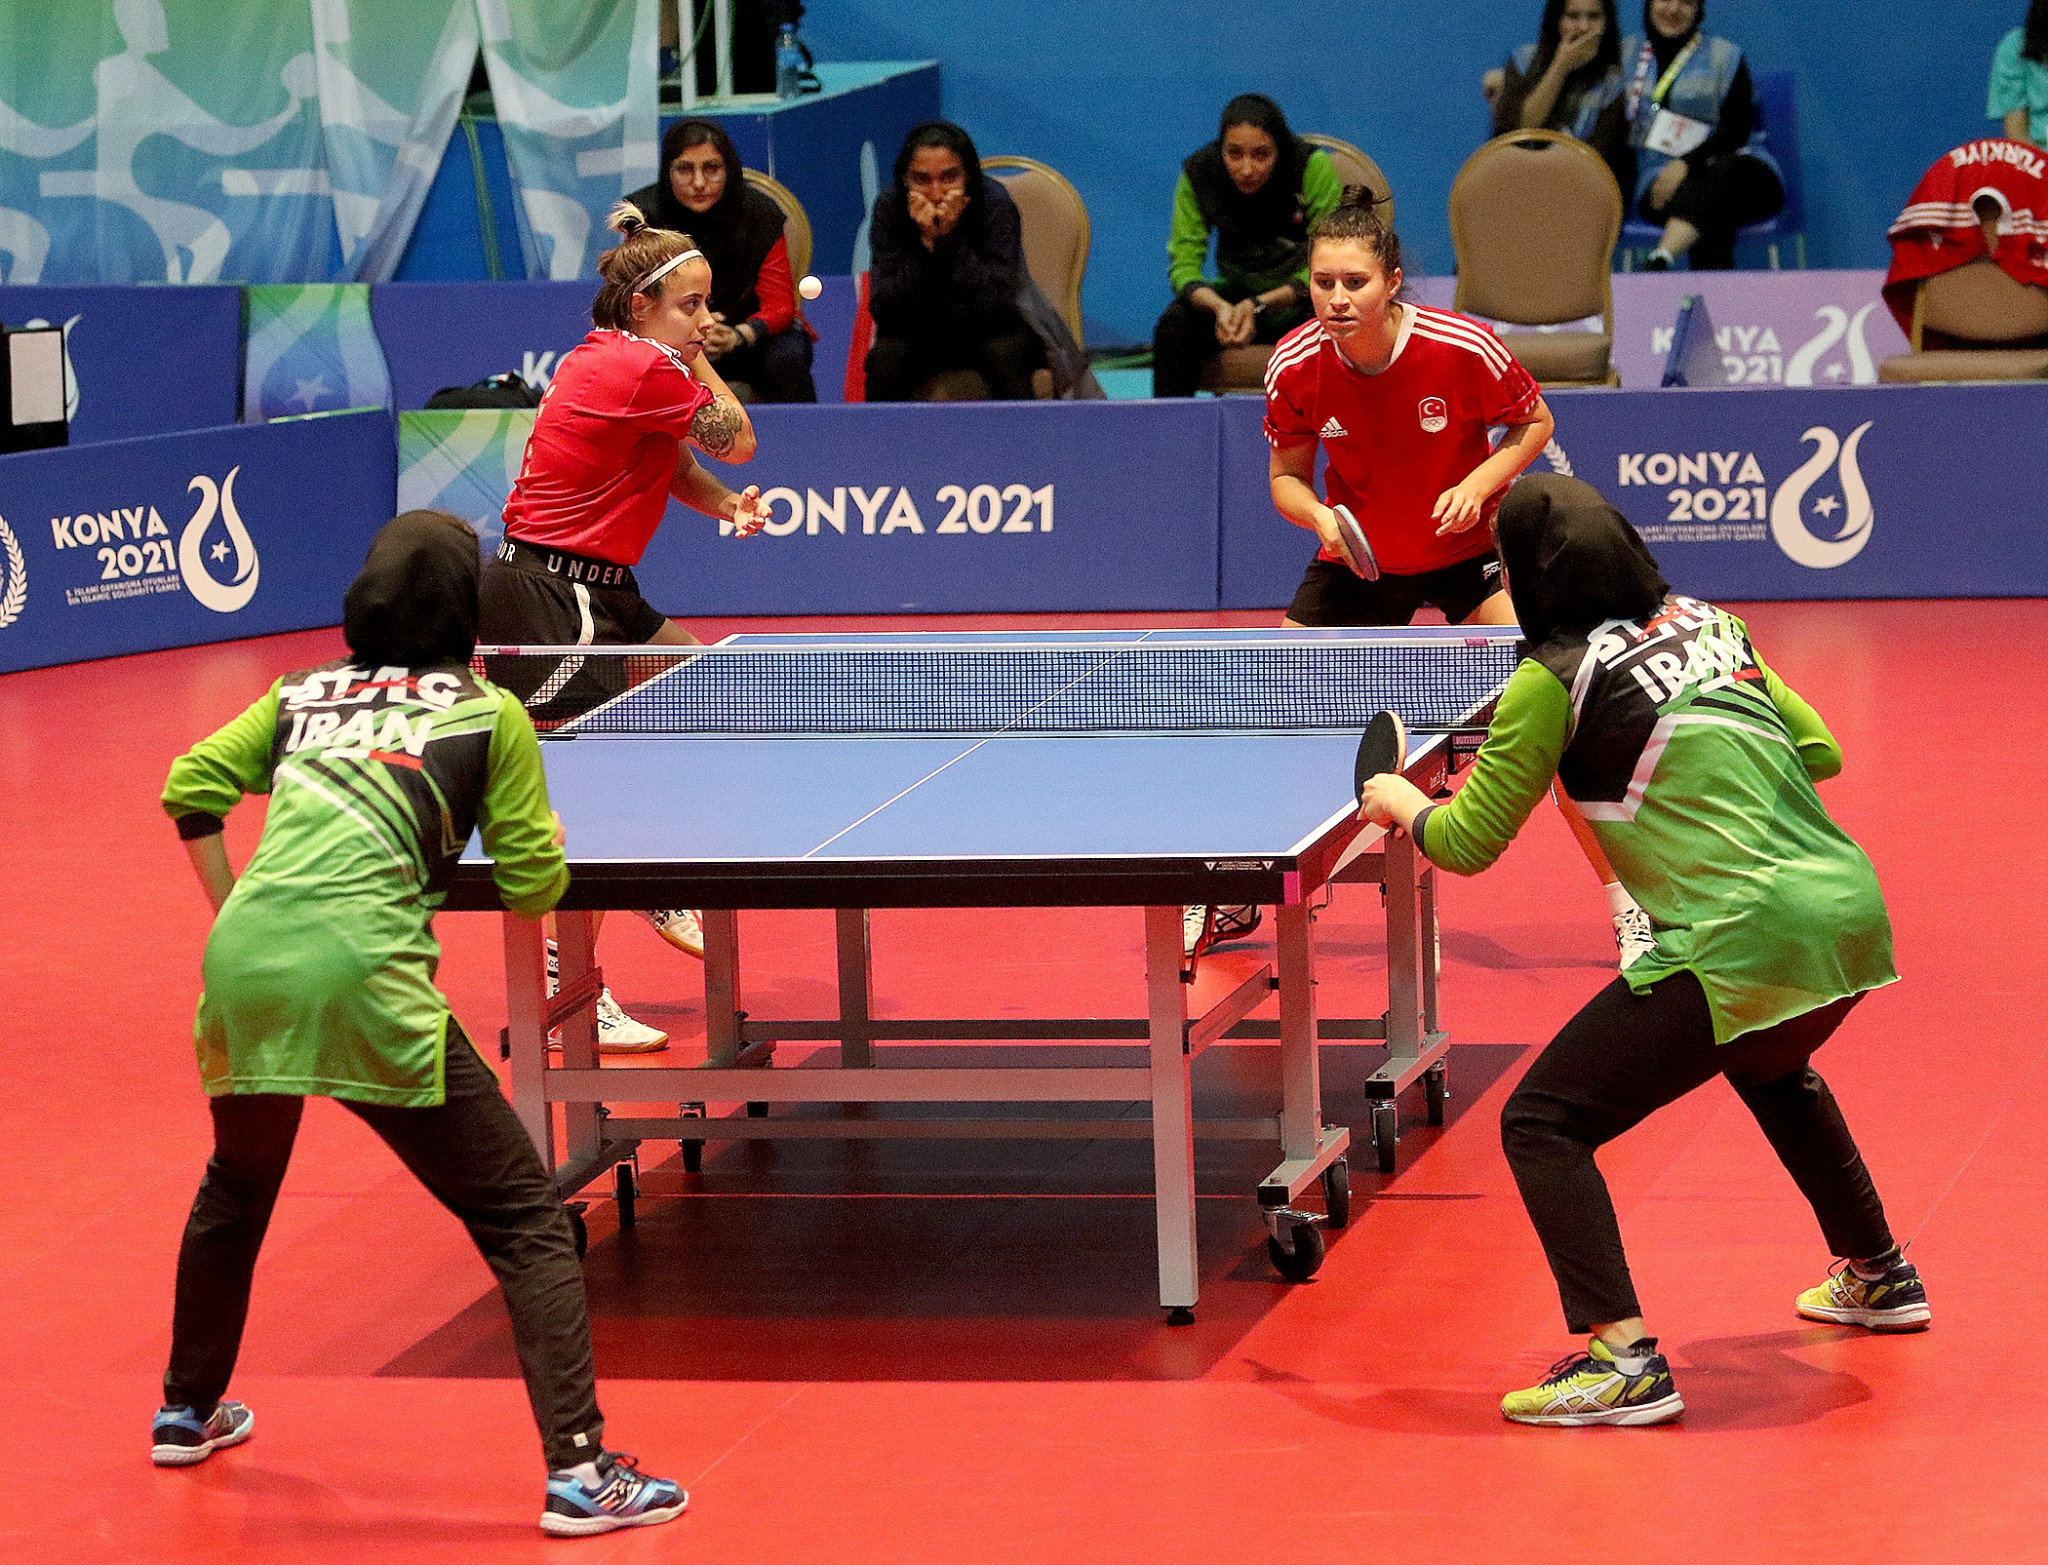 Table tennis team finals took place with Iran going up against Turkey ©Konya 2021